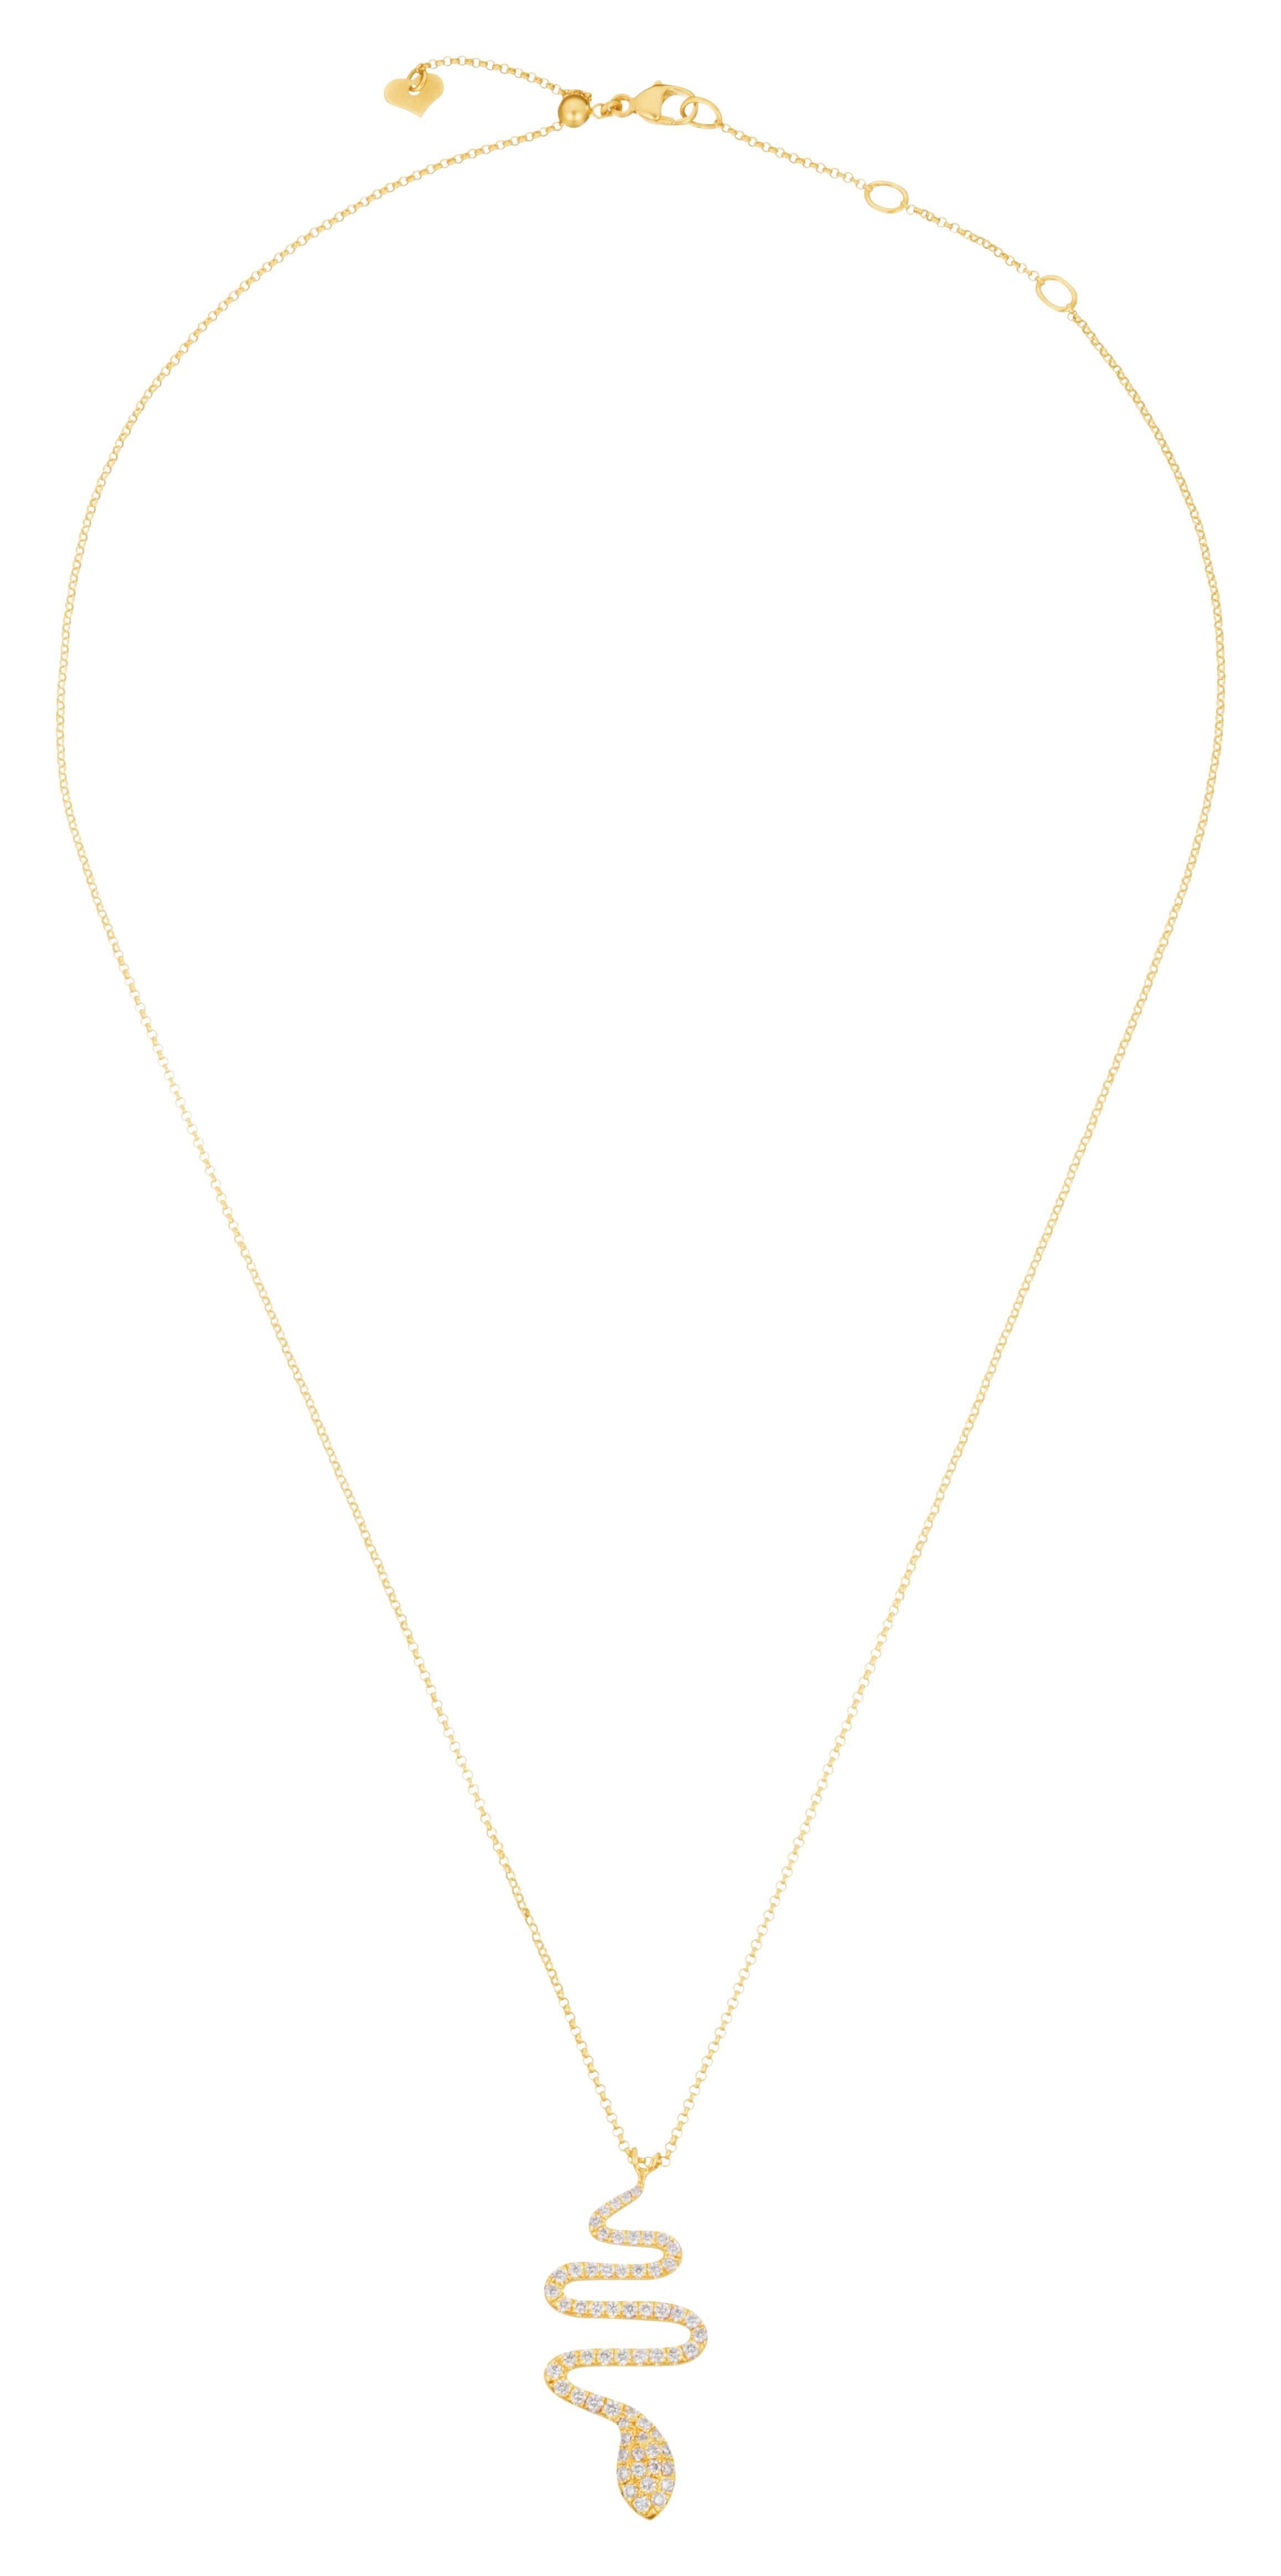 The Snake shaped Necklace ESTELLE is made of 18 Karat Yellow Gold with 62 White Diamonds 0.50 Carat.

We also do offer the matching Bracelet, Earrings and Ring.
